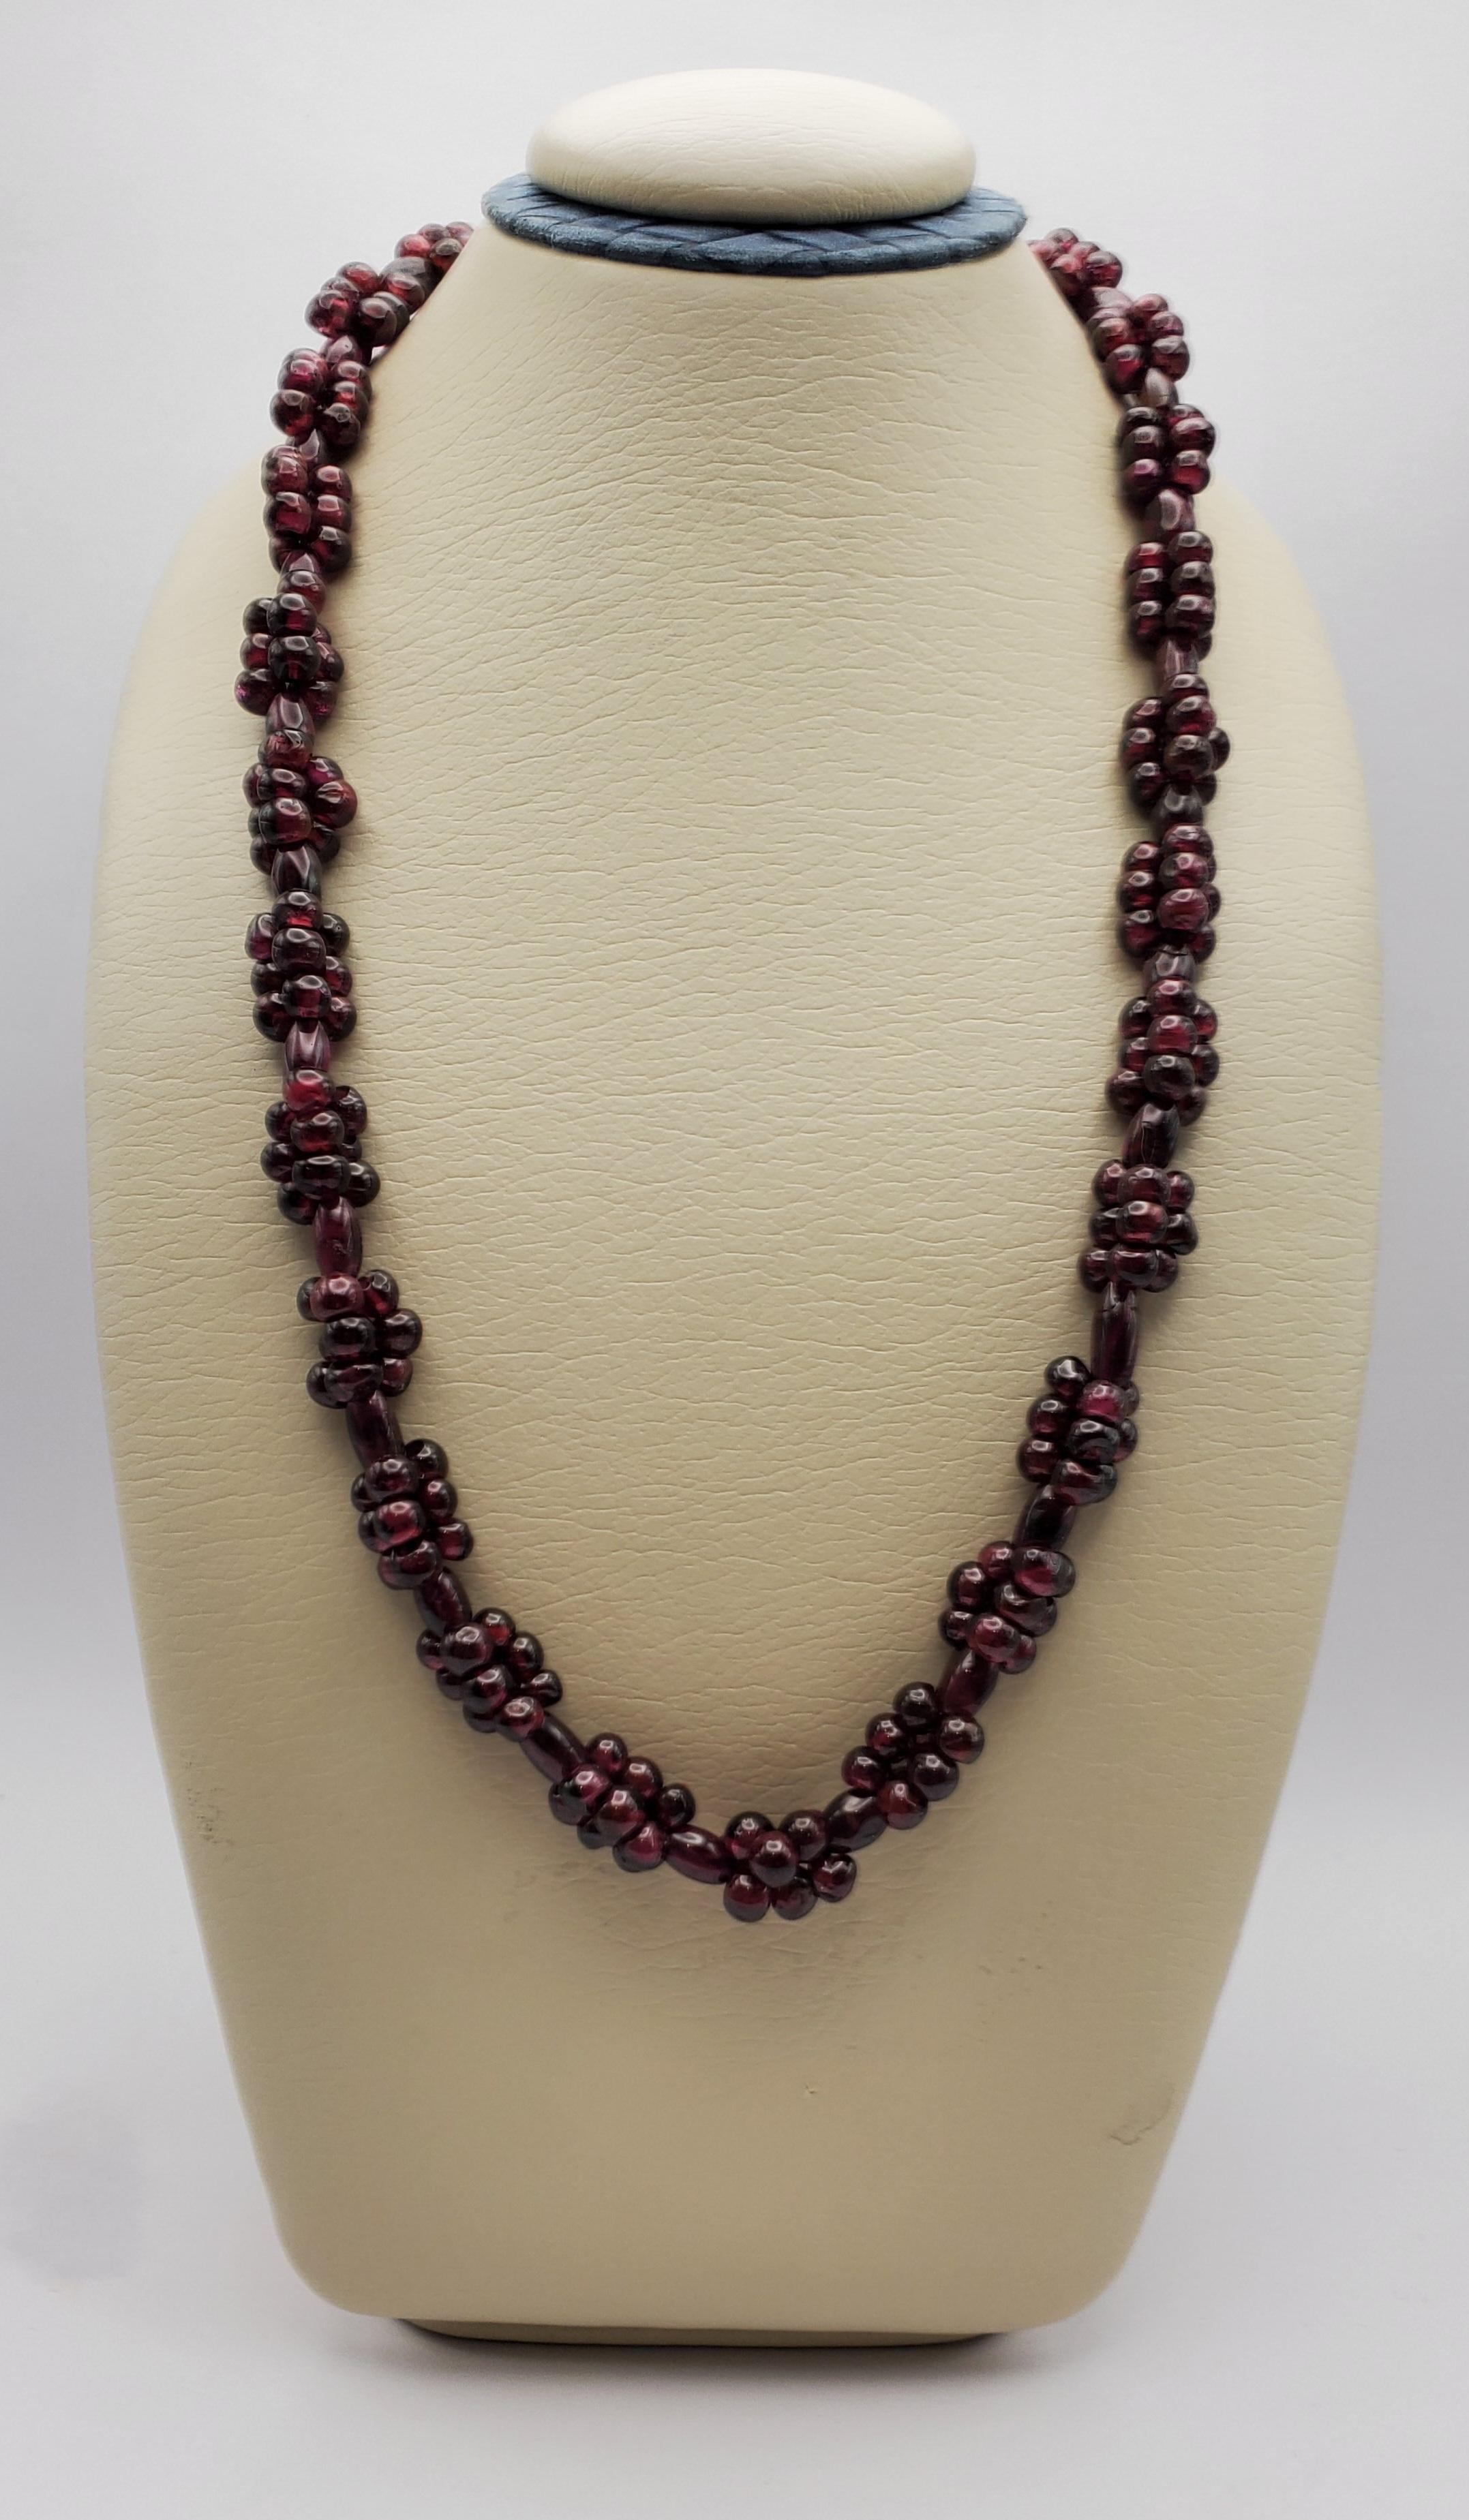 Beautiful polished garnet bead cluster station continuous necklace from the 1970s. The beads have the rich color of red grapes and shine in appealing bunches, adding interesting texture to this strand. The necklace does not have a clasp but at 24